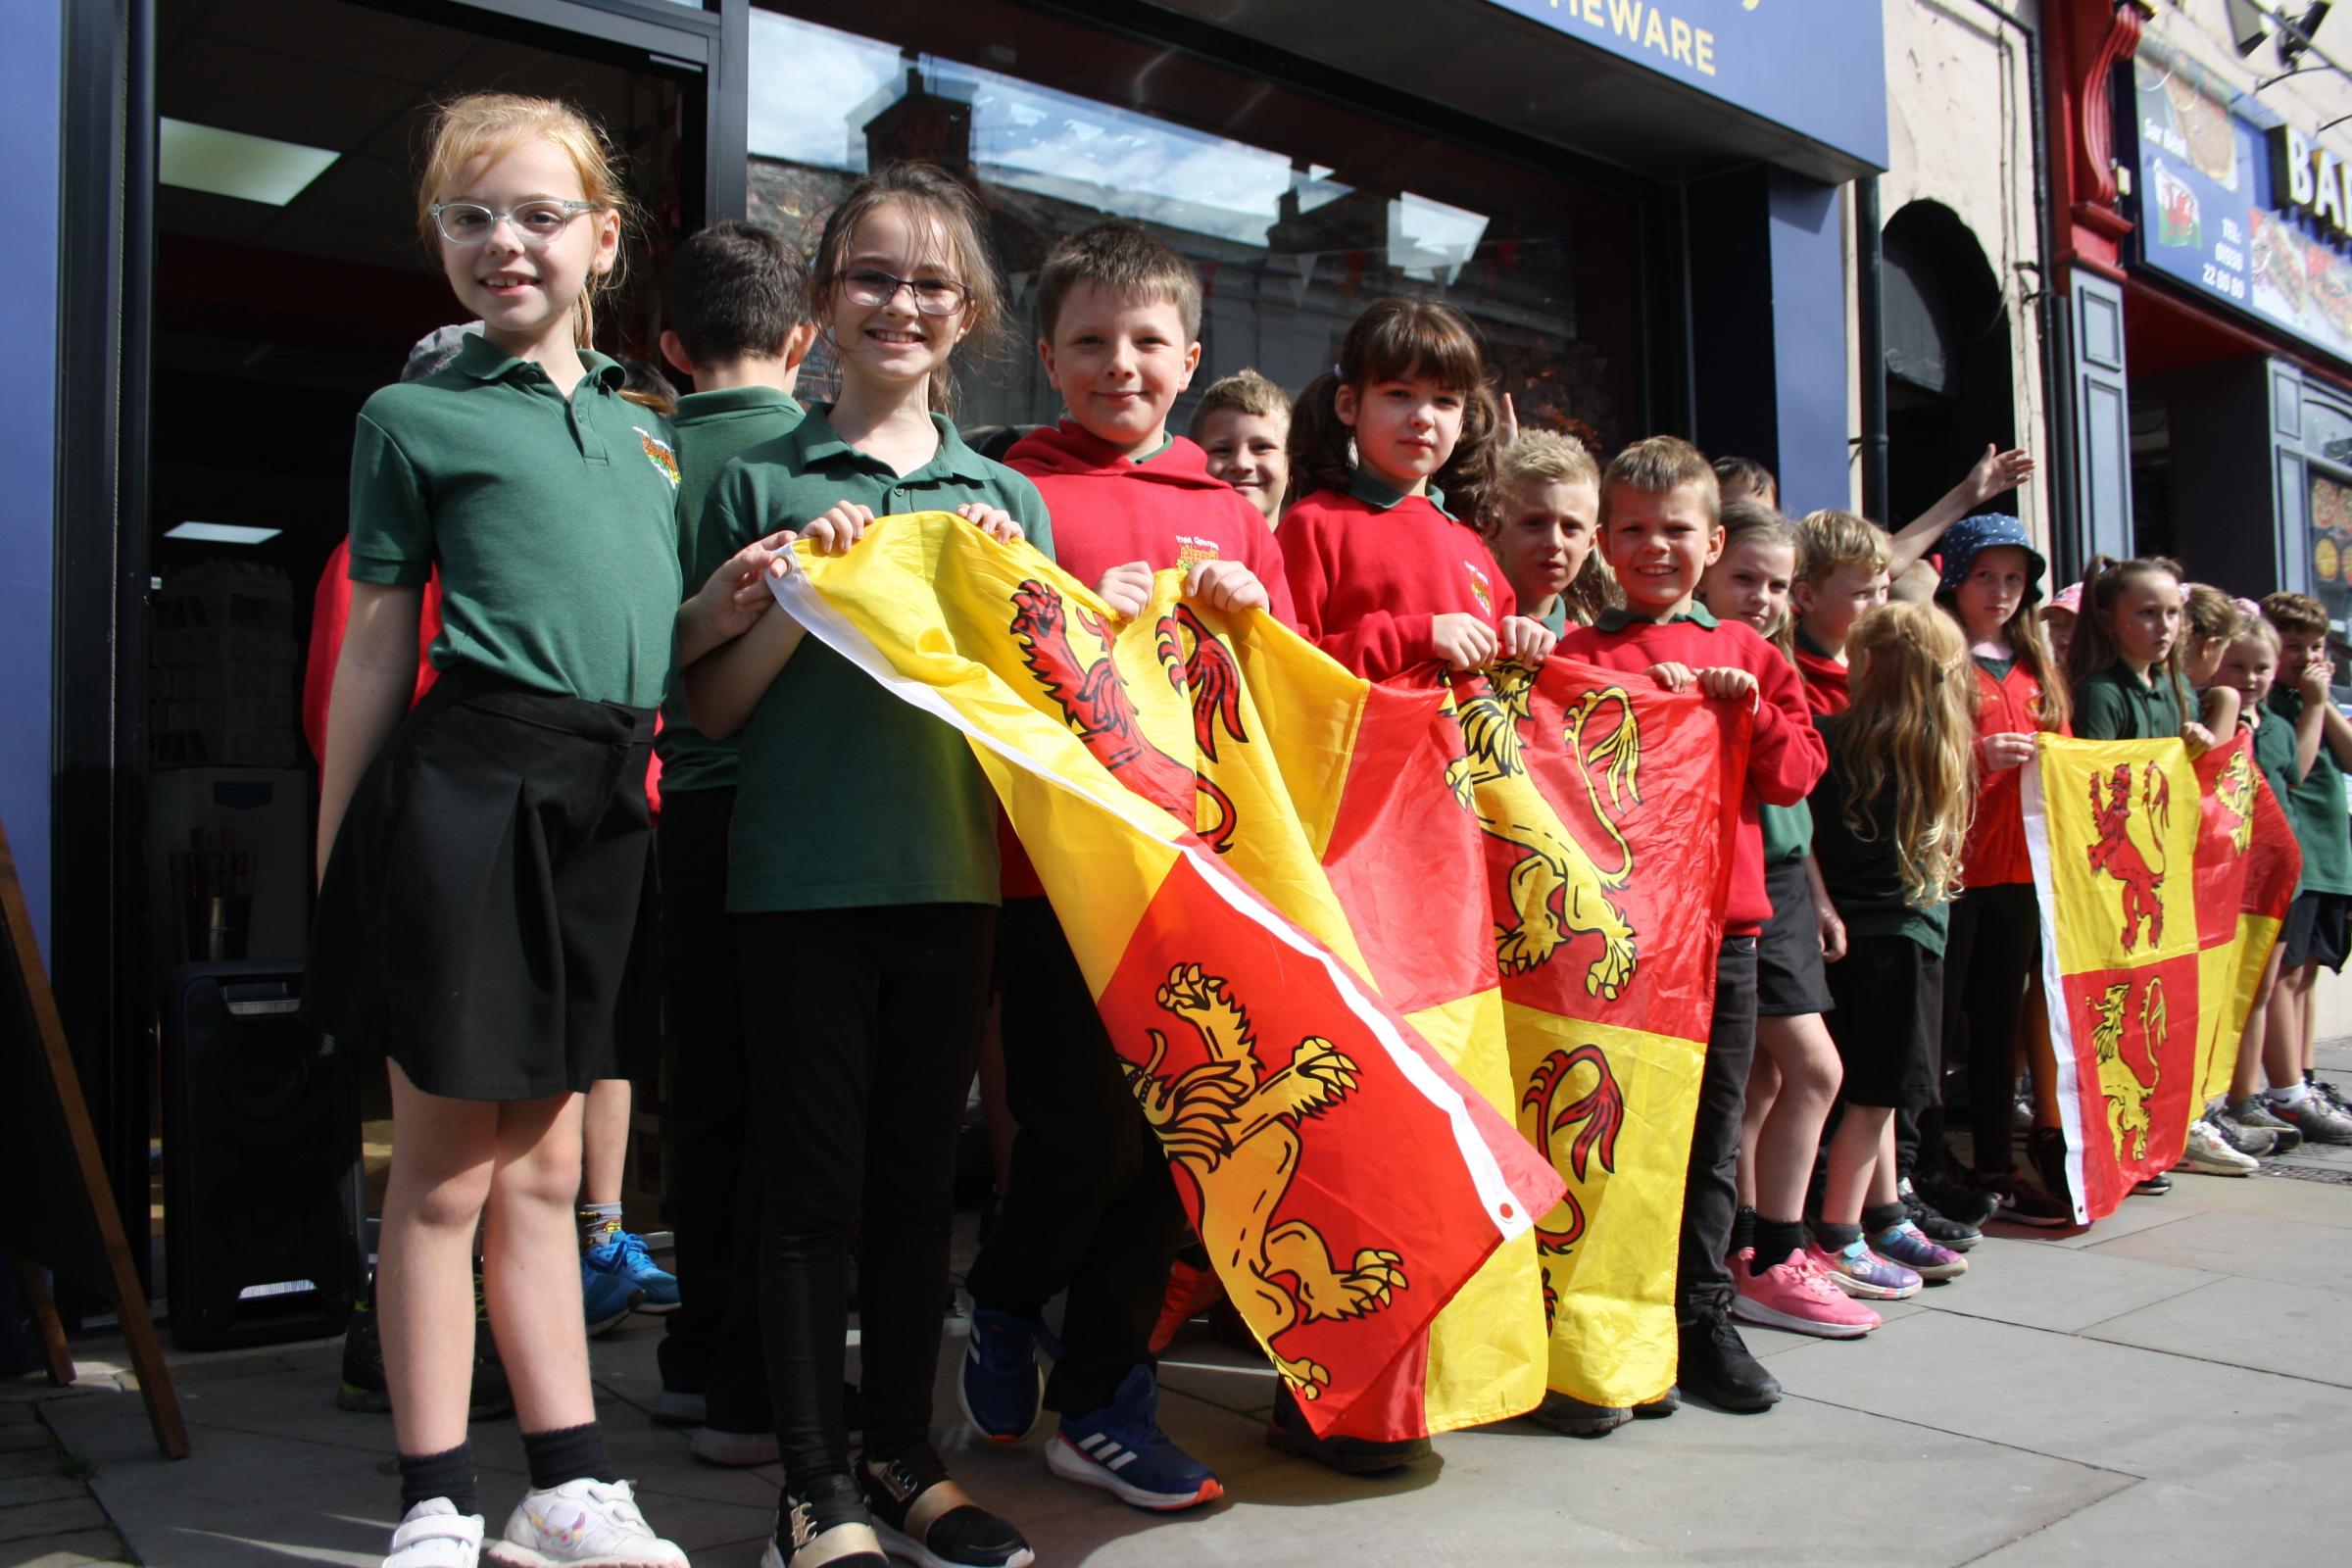 Ysgol Gymraeg Y Trallwng sing in Welshpool town centre to celebrate Owain Glyndwr Day on September 16, 2021. Picture by Anwen Parry/County Times